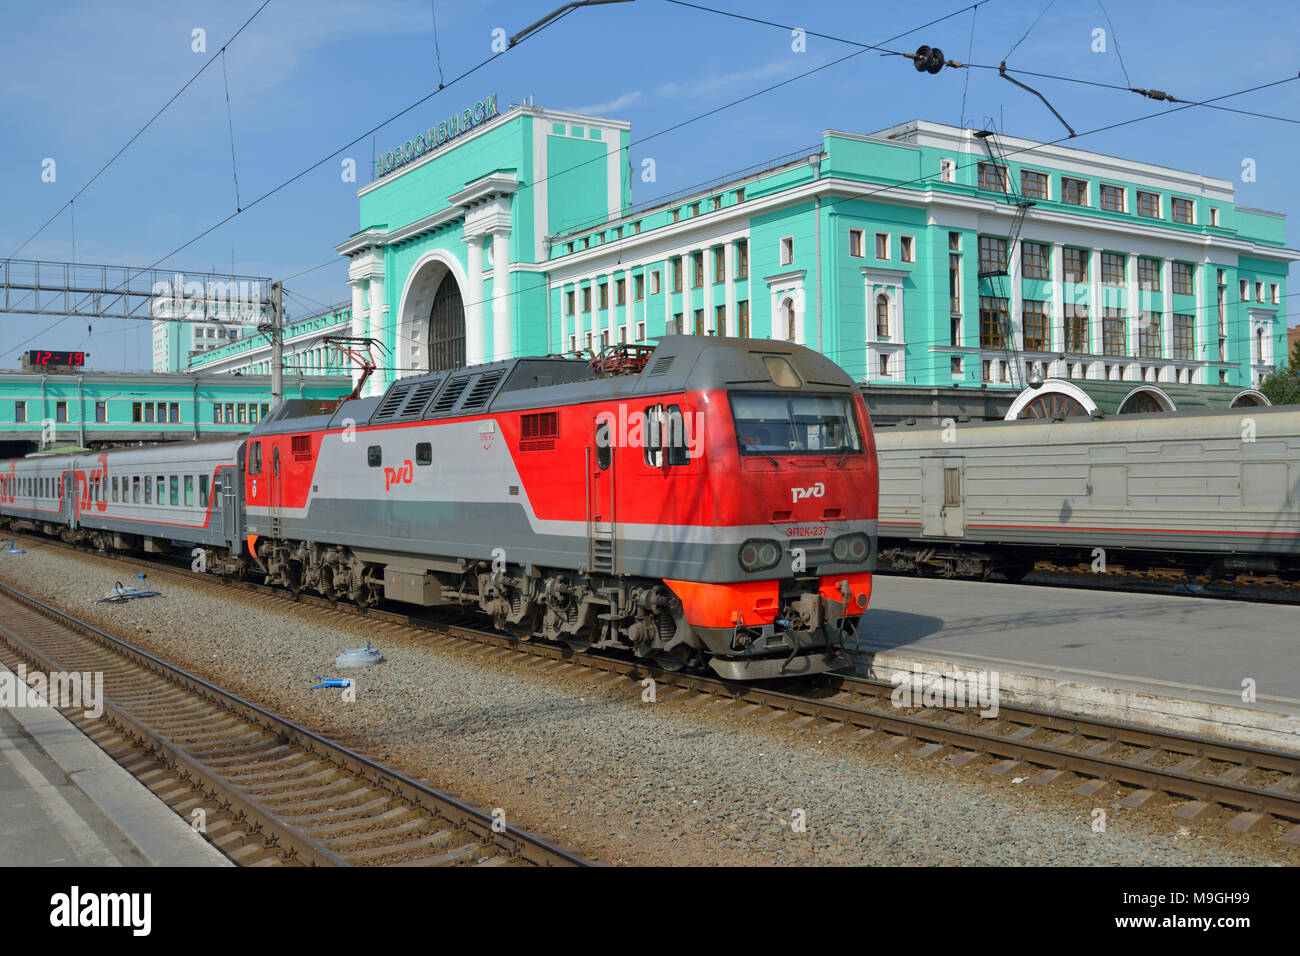 Novosibirsk, Russia - August 25, 2014: Passenger train arriving on the main railroad station of Novosibirsk. The building completed in 1939 and can ac Stock Photo